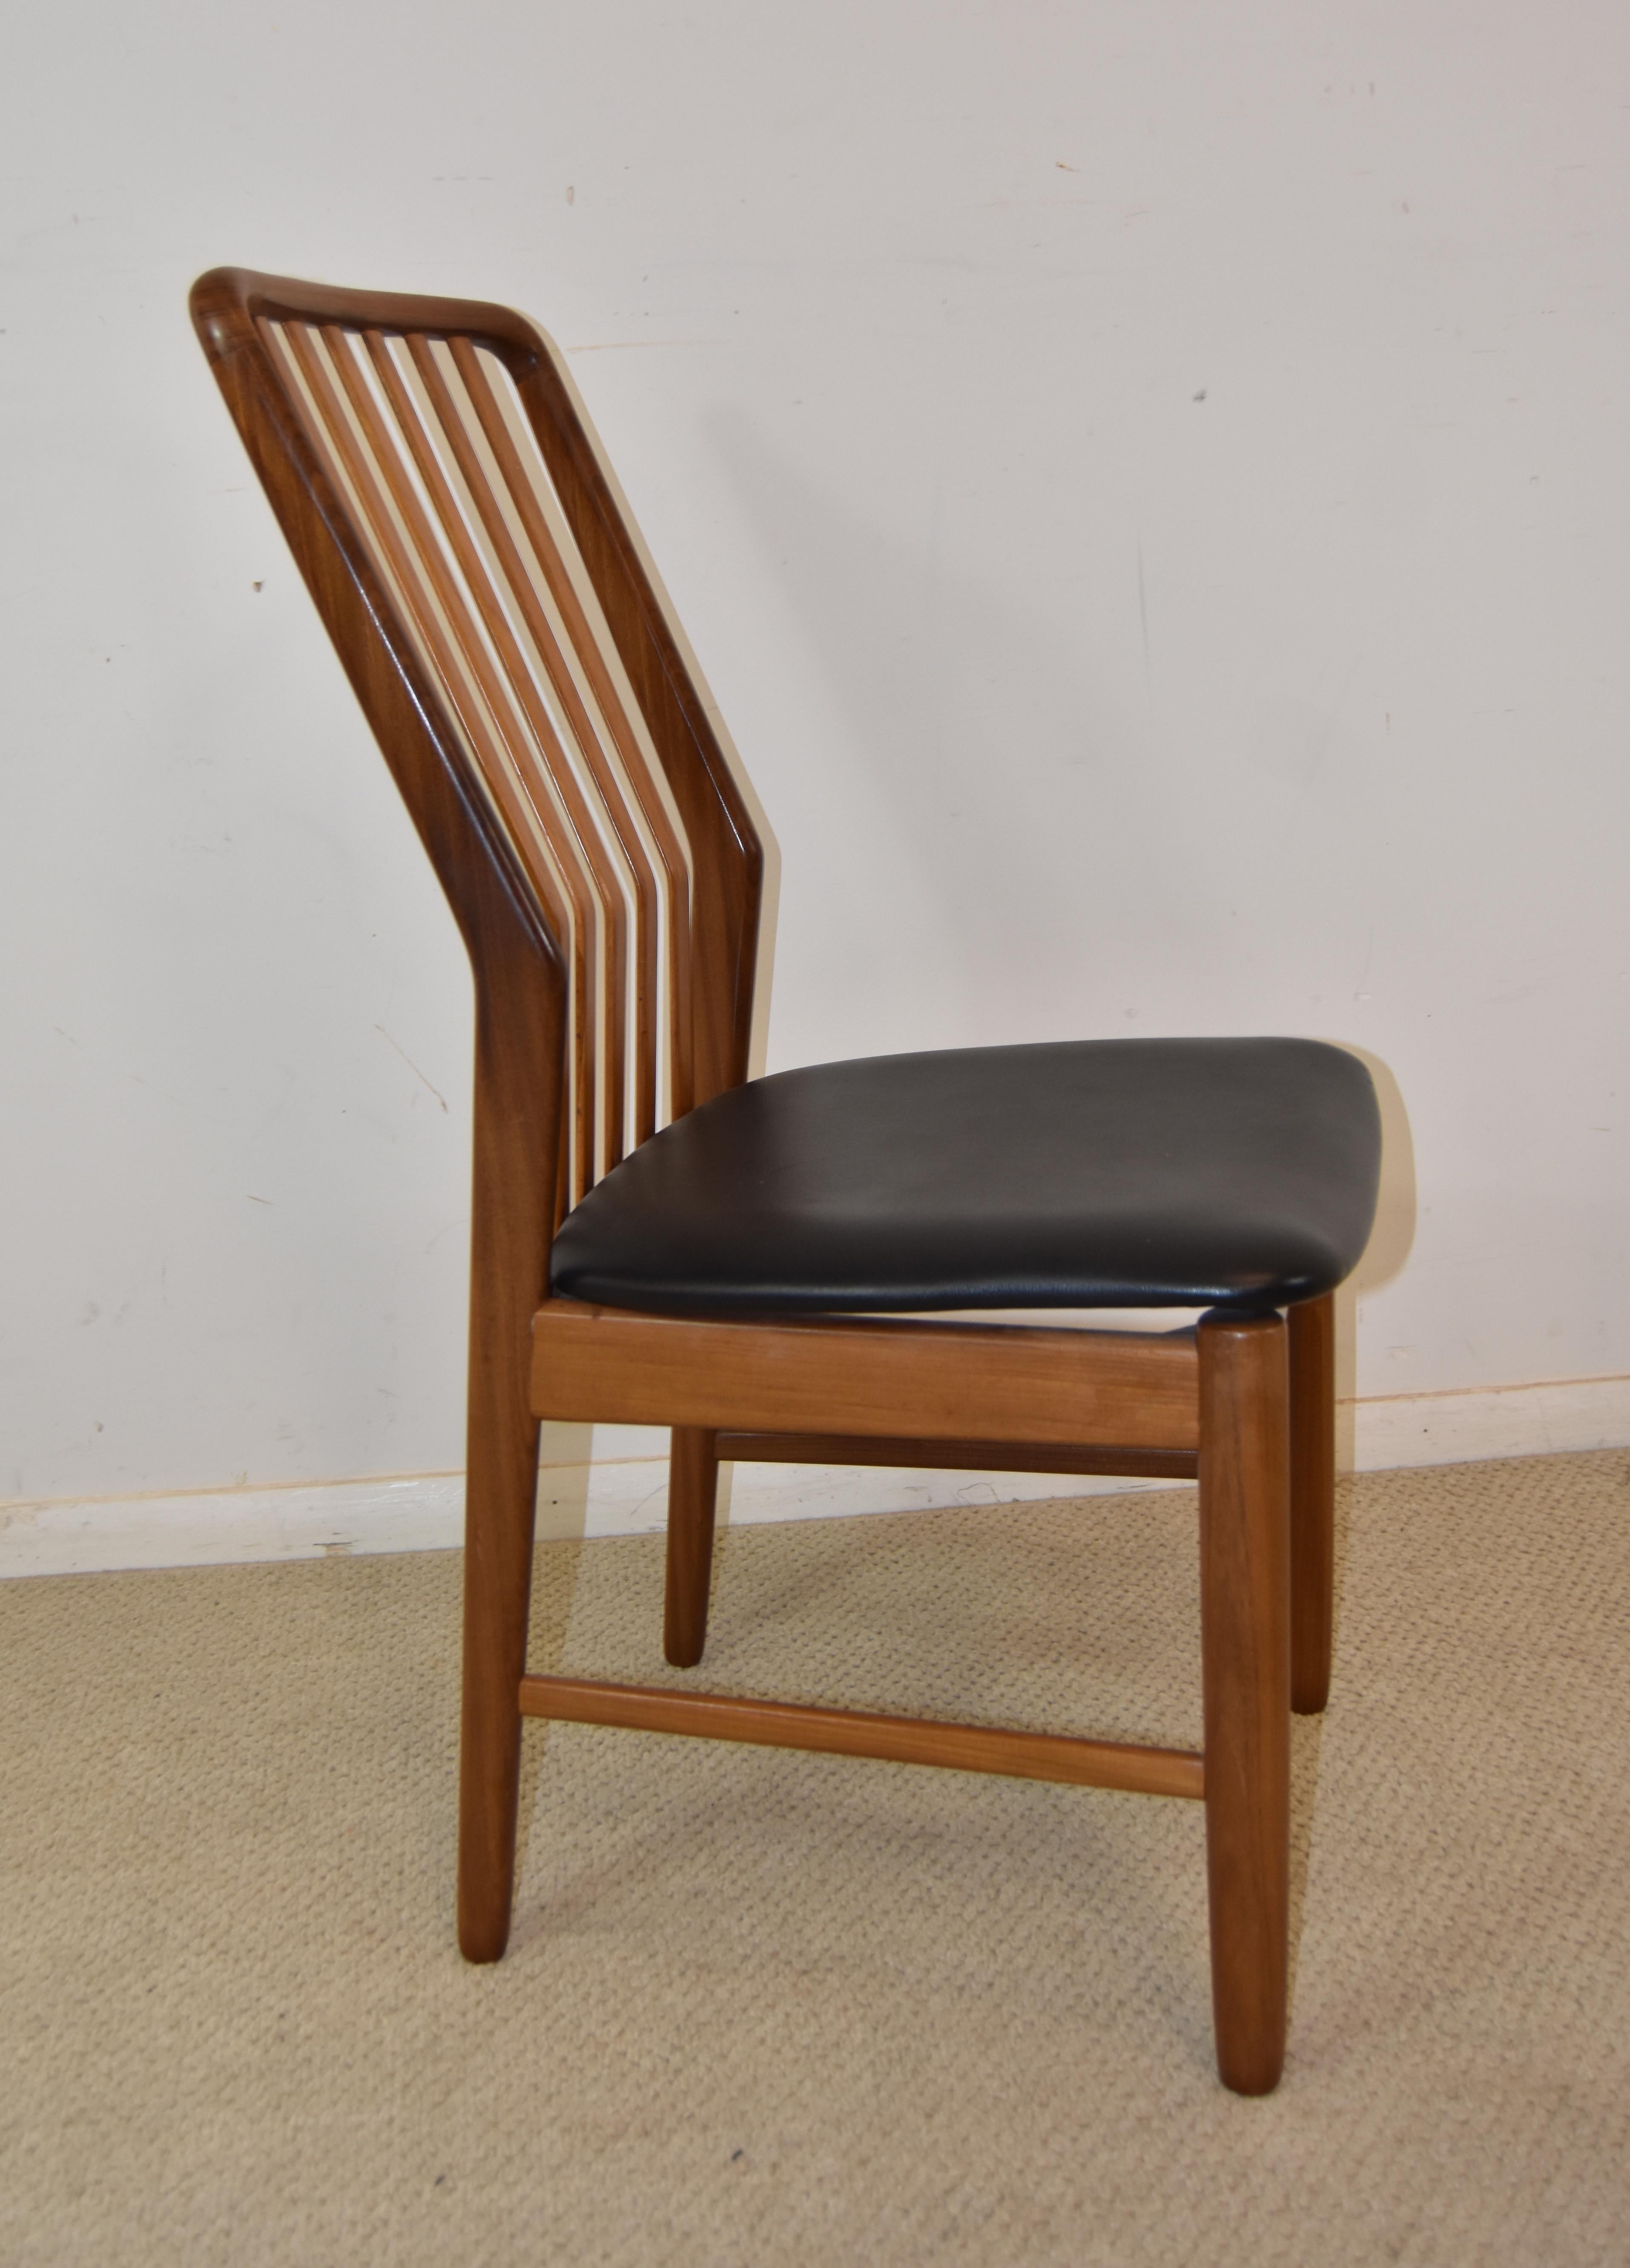 Pair of Mid-Century Modern teak chairs with black upholstered seats by Danish maker Moreddi. Curved slat backs in two shades of finish. Very nice condition. Slight wear to seats. Dimensions: 23.5